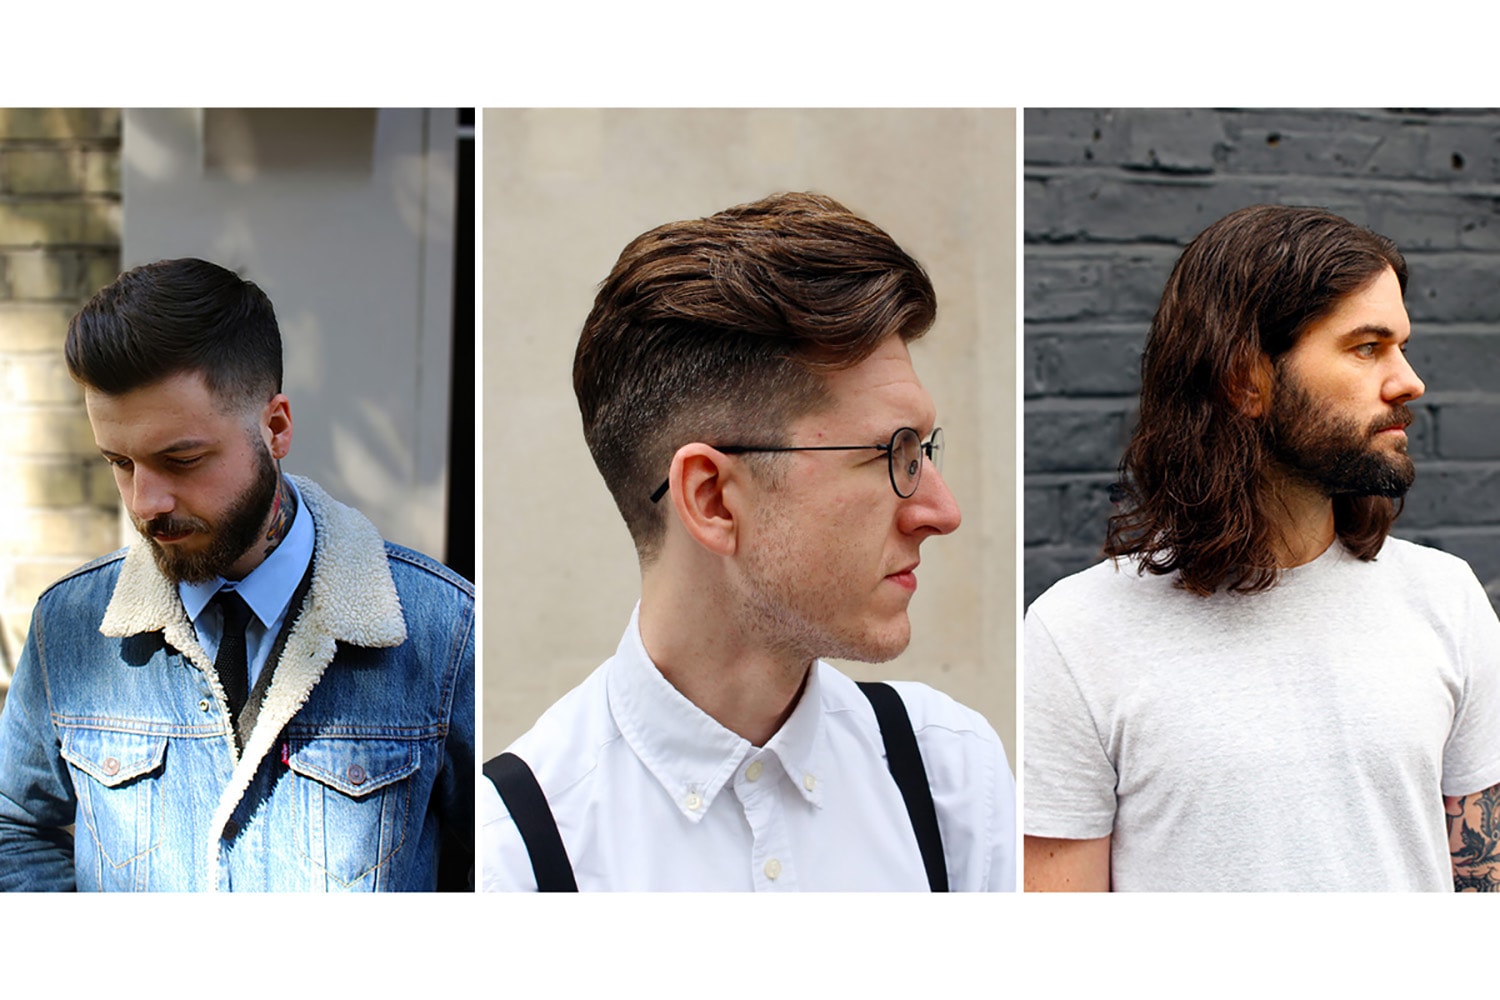 19 Summer Hairstyles for Men (Totally Cool Styles)